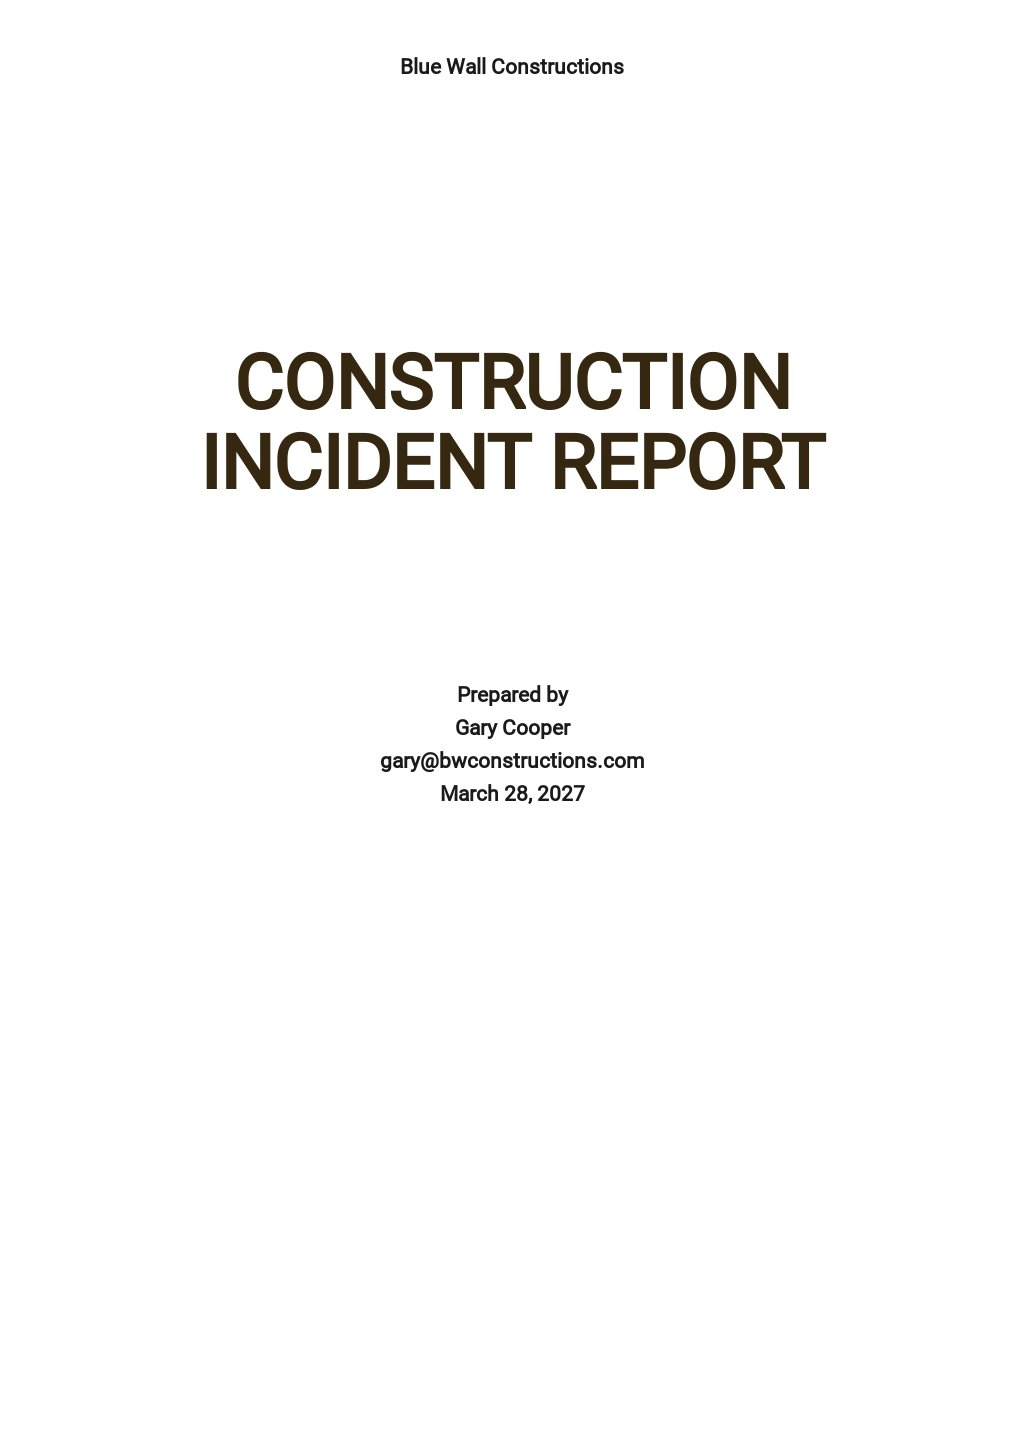 Simple Construction Incident Report Template.jpe